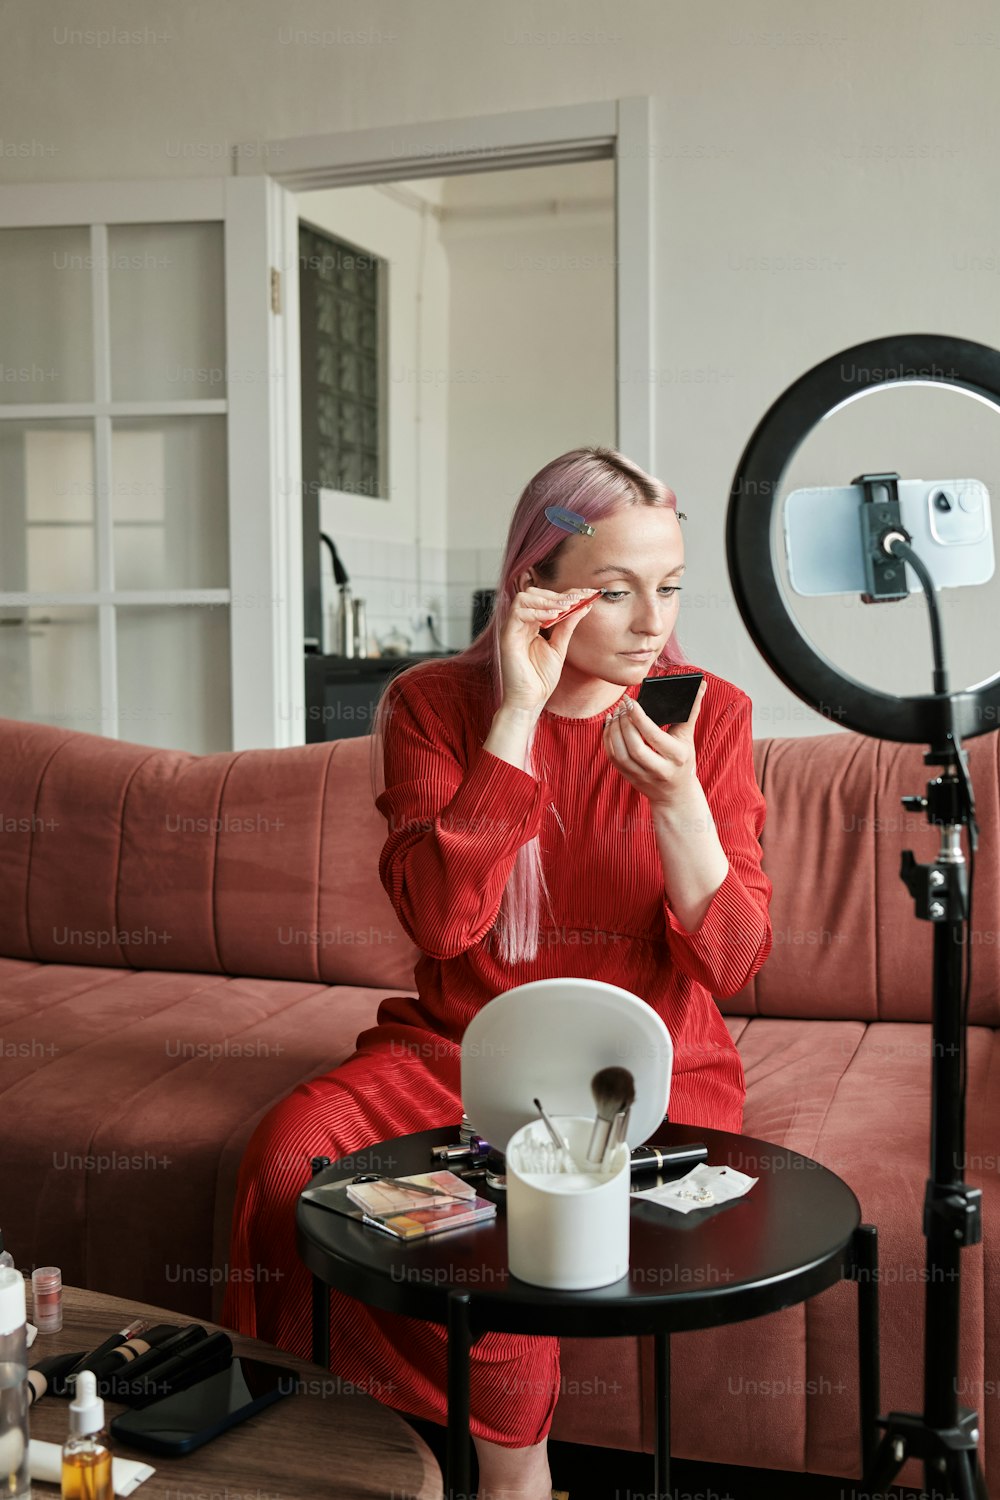 a woman sitting on a couch talking on a cell phone